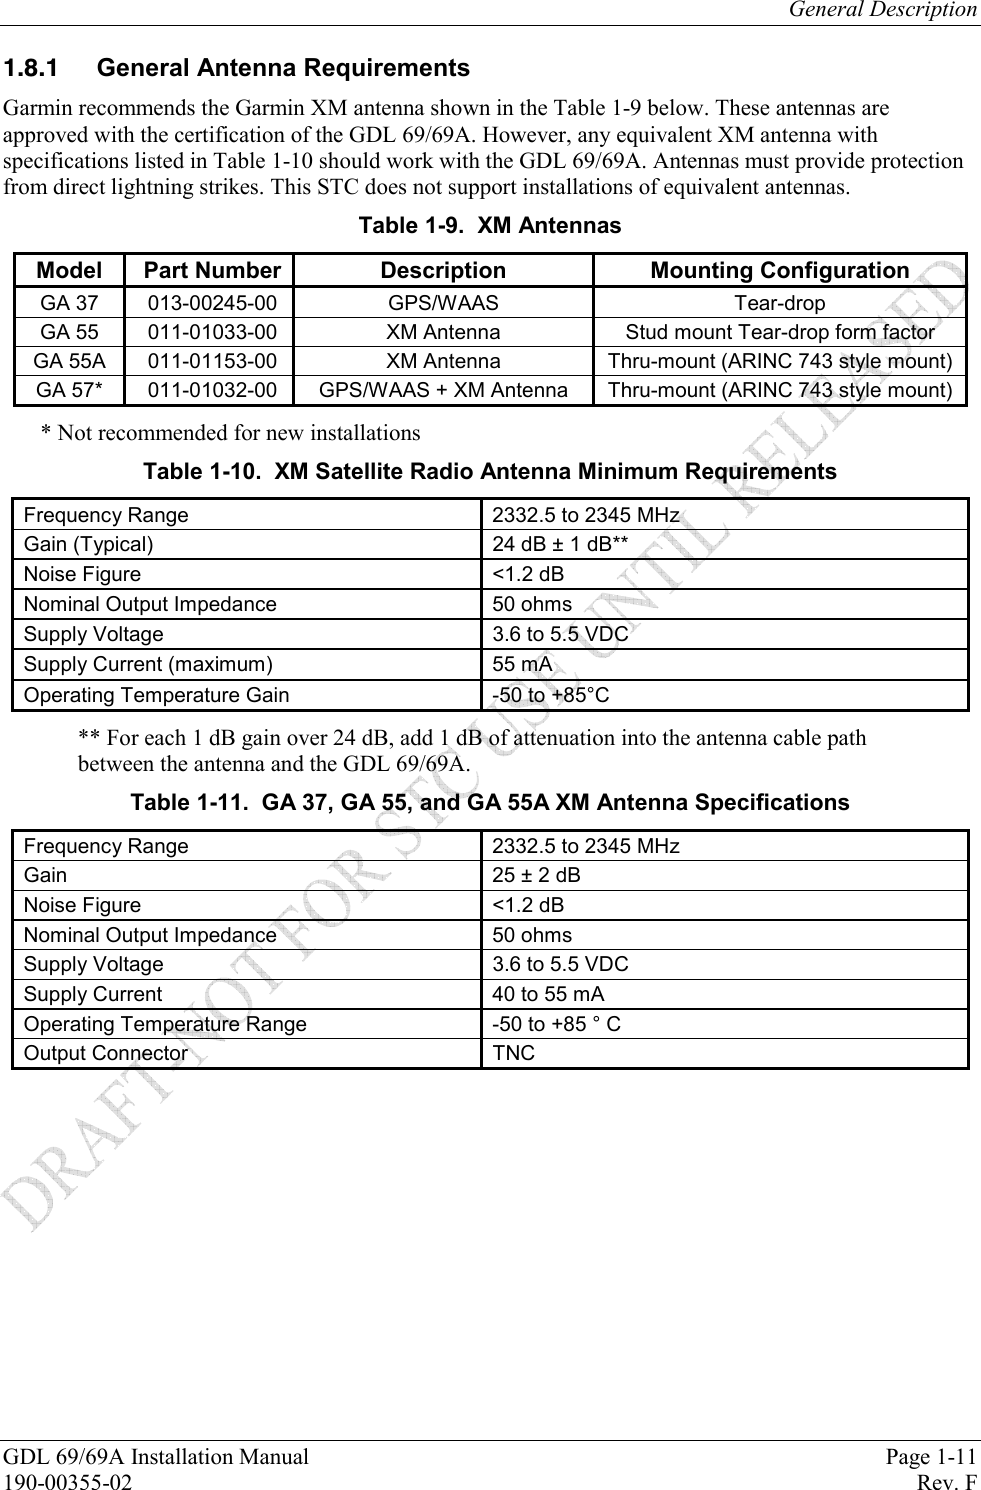 General Description GDL 69/69A Installation Manual  Page 1-11 190-00355-02   Rev. F  General Antenna Requirements Garmin recommends the Garmin XM antenna shown in the Table 1-9 below. These antennas are approved with the certification of the GDL 69/69A. However, any equivalent XM antenna with specifications listed in Table 1-10 should work with the GDL 69/69A. Antennas must provide protection from direct lightning strikes. This STC does not support installations of equivalent antennas.  Table 1-9.  XM Antennas Model  Part Number  Description  Mounting Configuration GA 37  013-00245-00  GPS/WAAS  Tear-drop GA 55  011-01033-00  XM Antenna  Stud mount Tear-drop form factor GA 55A  011-01153-00  XM Antenna  Thru-mount (ARINC 743 style mount) GA 57*  011-01032-00  GPS/WAAS + XM Antenna  Thru-mount (ARINC 743 style mount) * Not recommended for new installations Table 1-10.  XM Satellite Radio Antenna Minimum Requirements Frequency Range  2332.5 to 2345 MHz Gain (Typical)  24 dB ± 1 dB** Noise Figure  &lt;1.2 dB Nominal Output Impedance  50 ohms Supply Voltage  3.6 to 5.5 VDC Supply Current (maximum)  55 mA Operating Temperature Gain  -50 to +85°C ** For each 1 dB gain over 24 dB, add 1 dB of attenuation into the antenna cable path between the antenna and the GDL 69/69A. Table 1-11.  GA 37, GA 55, and GA 55A XM Antenna Specifications Frequency Range  2332.5 to 2345 MHz Gain  25 ± 2 dB Noise Figure  &lt;1.2 dB Nominal Output Impedance  50 ohms Supply Voltage  3.6 to 5.5 VDC Supply Current  40 to 55 mA Operating Temperature Range  -50 to +85 ° C Output Connector  TNC   